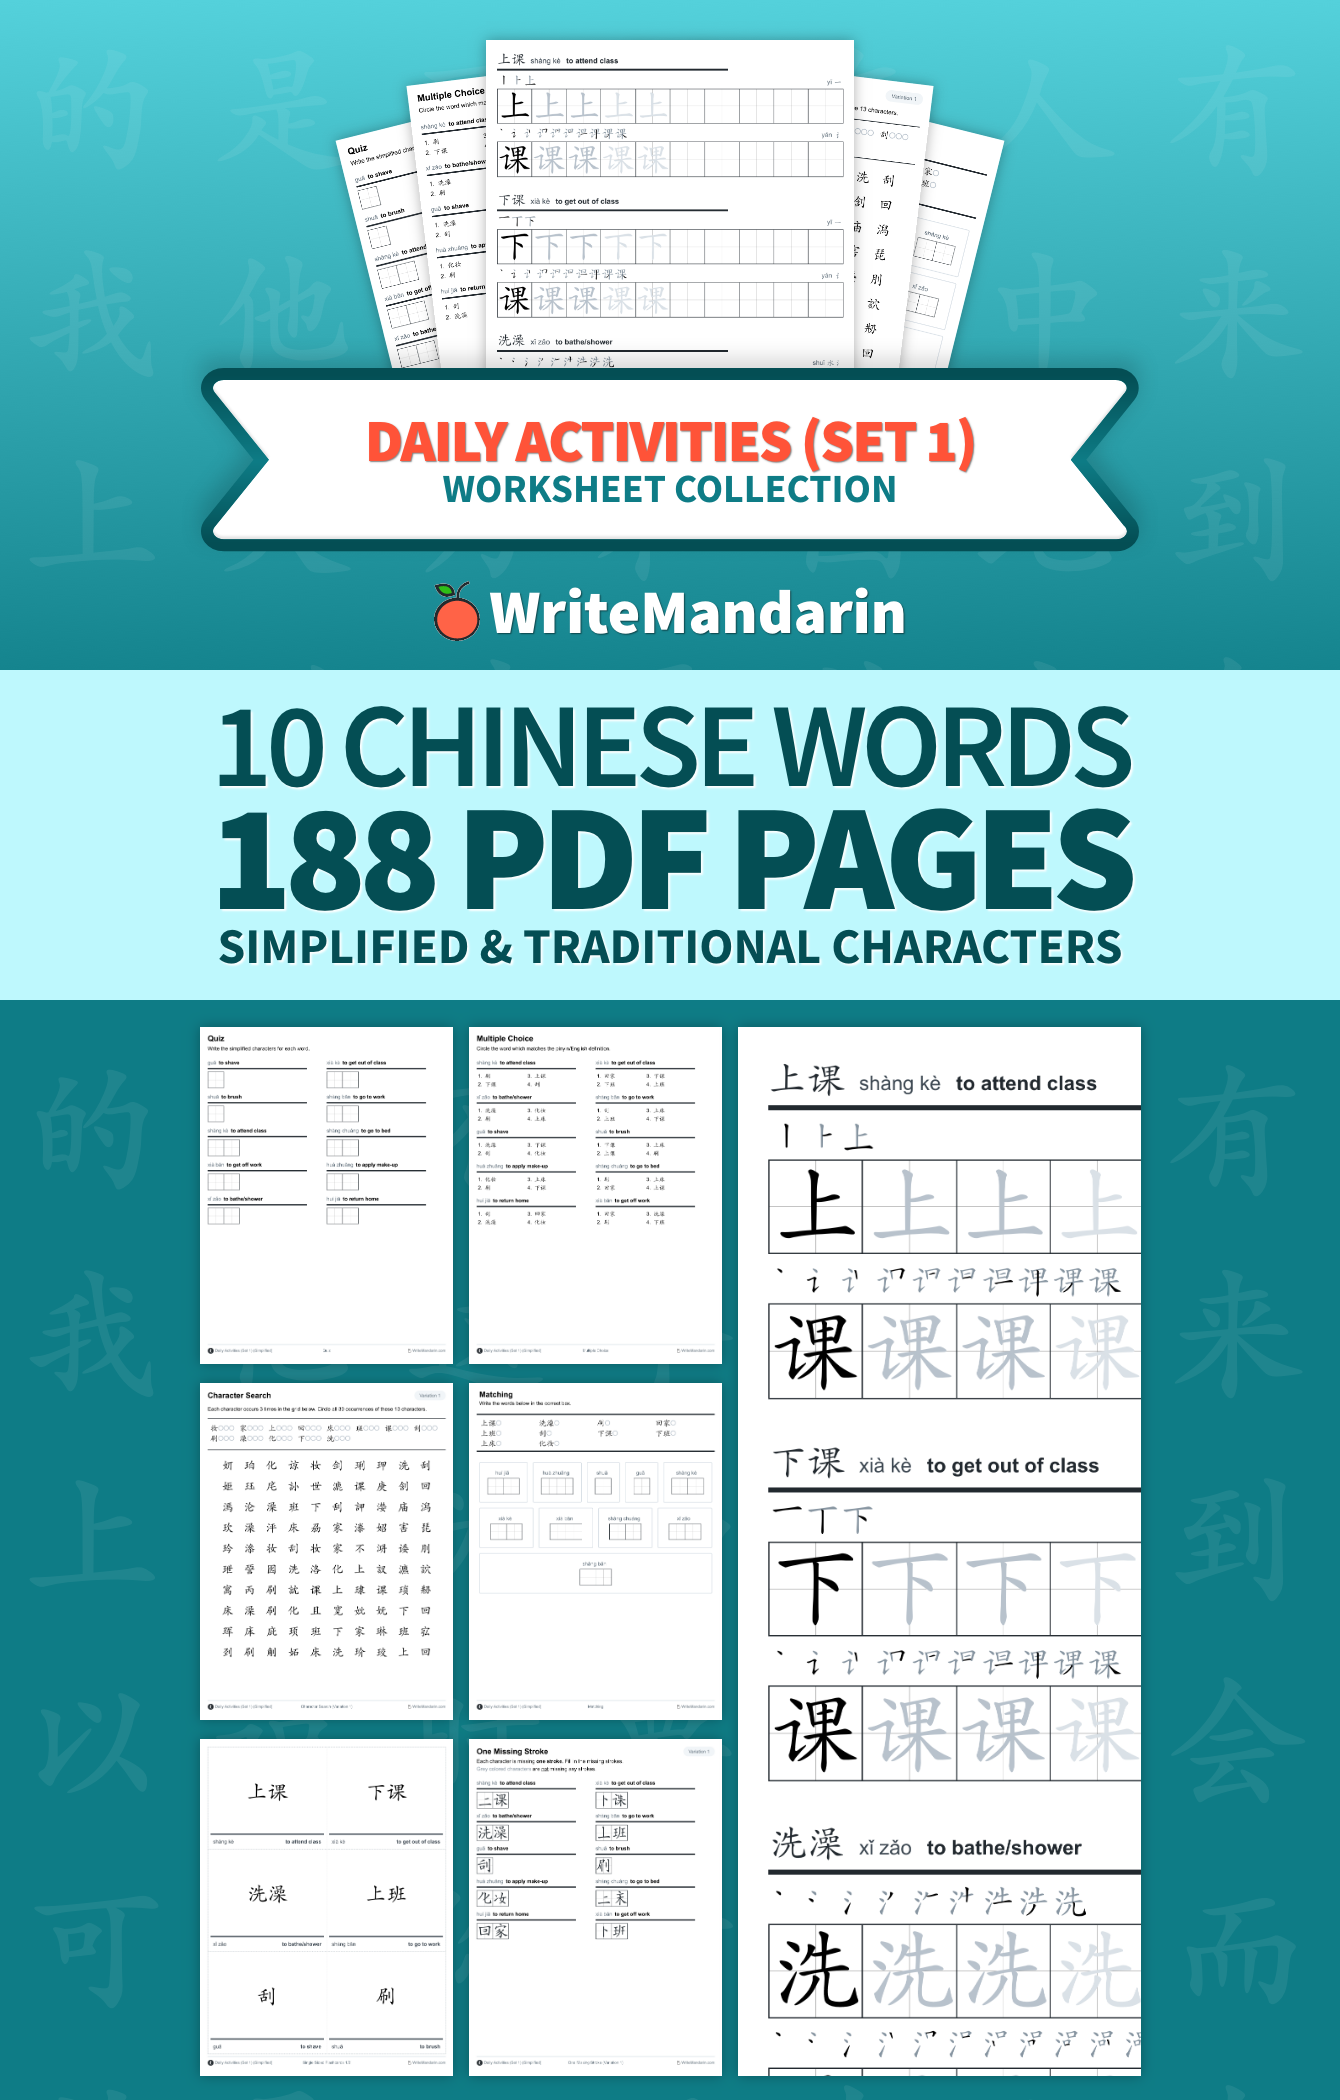 Preview image of Daily Activities (Set 1) worksheet collection